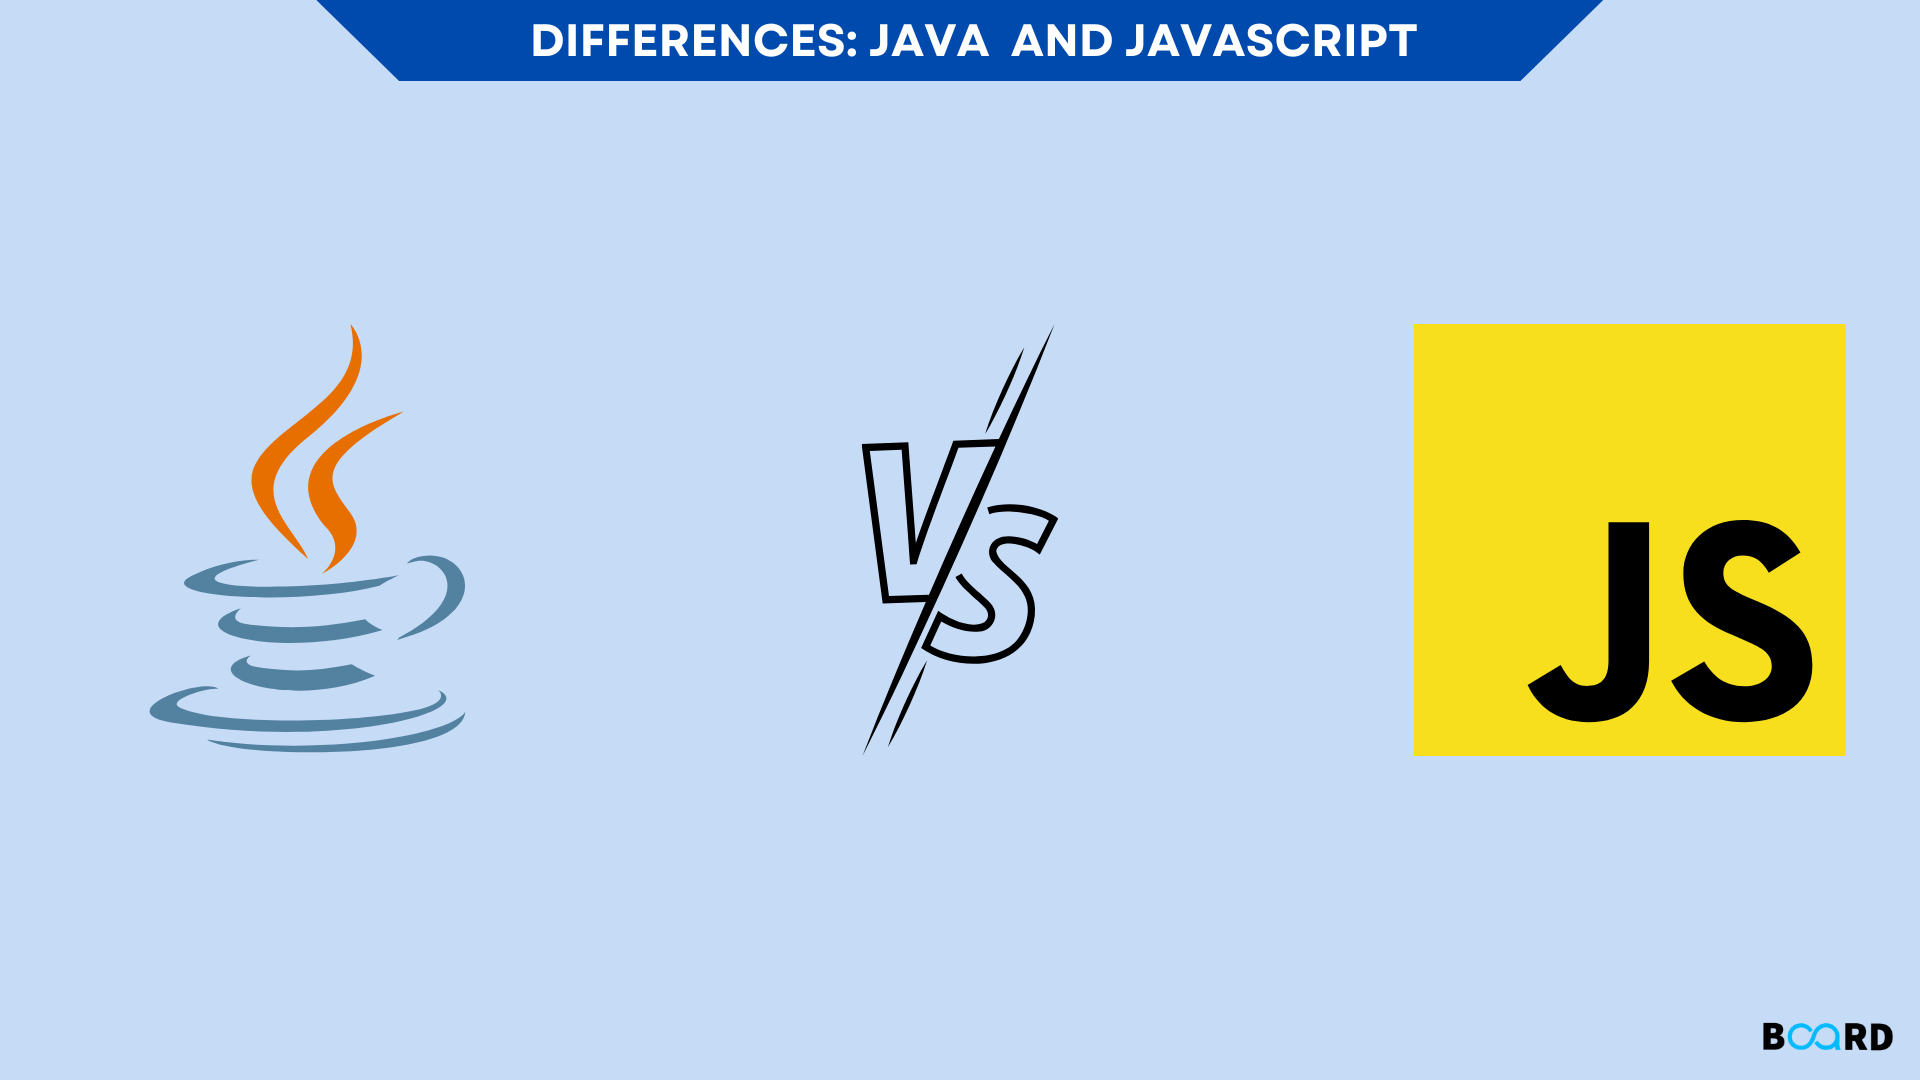 Java Vs Javascript: What's The Difference?